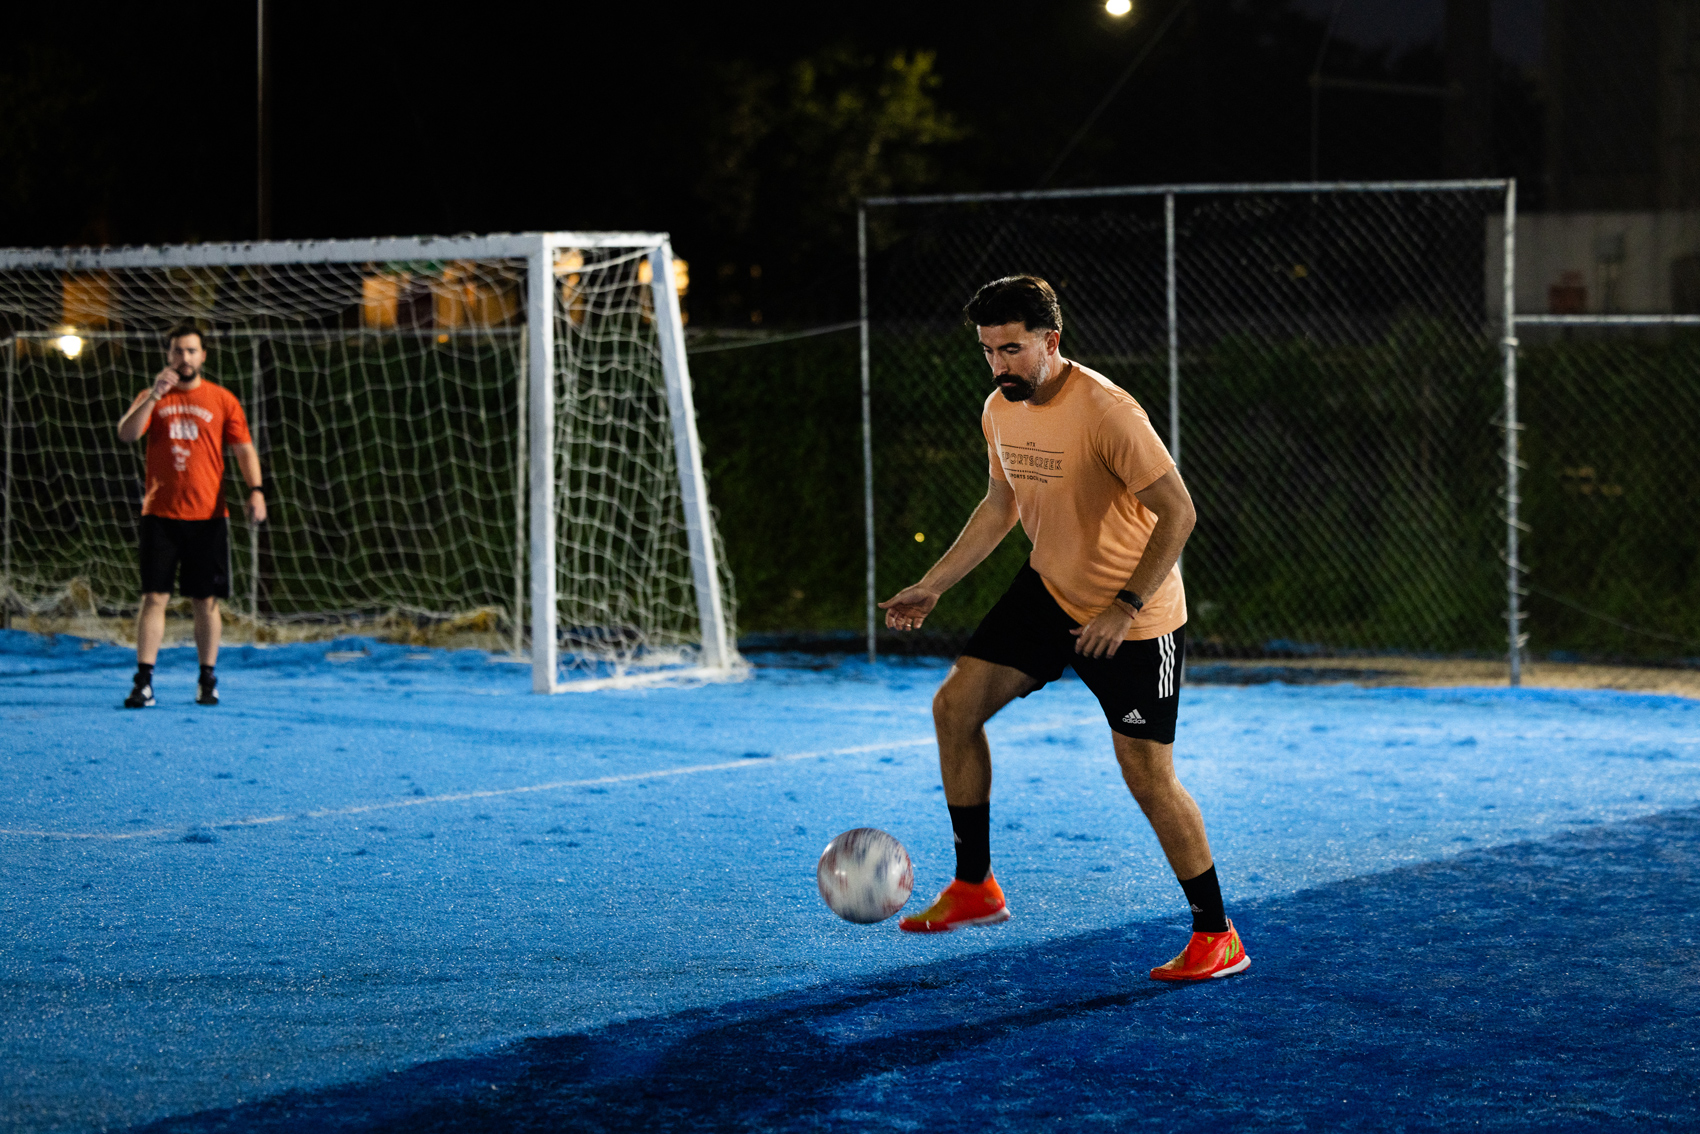 Juan Vega, 29, plays soccer in a community team, Wednesday, Oct. 25, 2023, in Houston. Once a week, Vega, a Houstonian who had to quit his job with the Dynamo because his status changed through the DACA program, plays soccer to keep himself balanced and active.